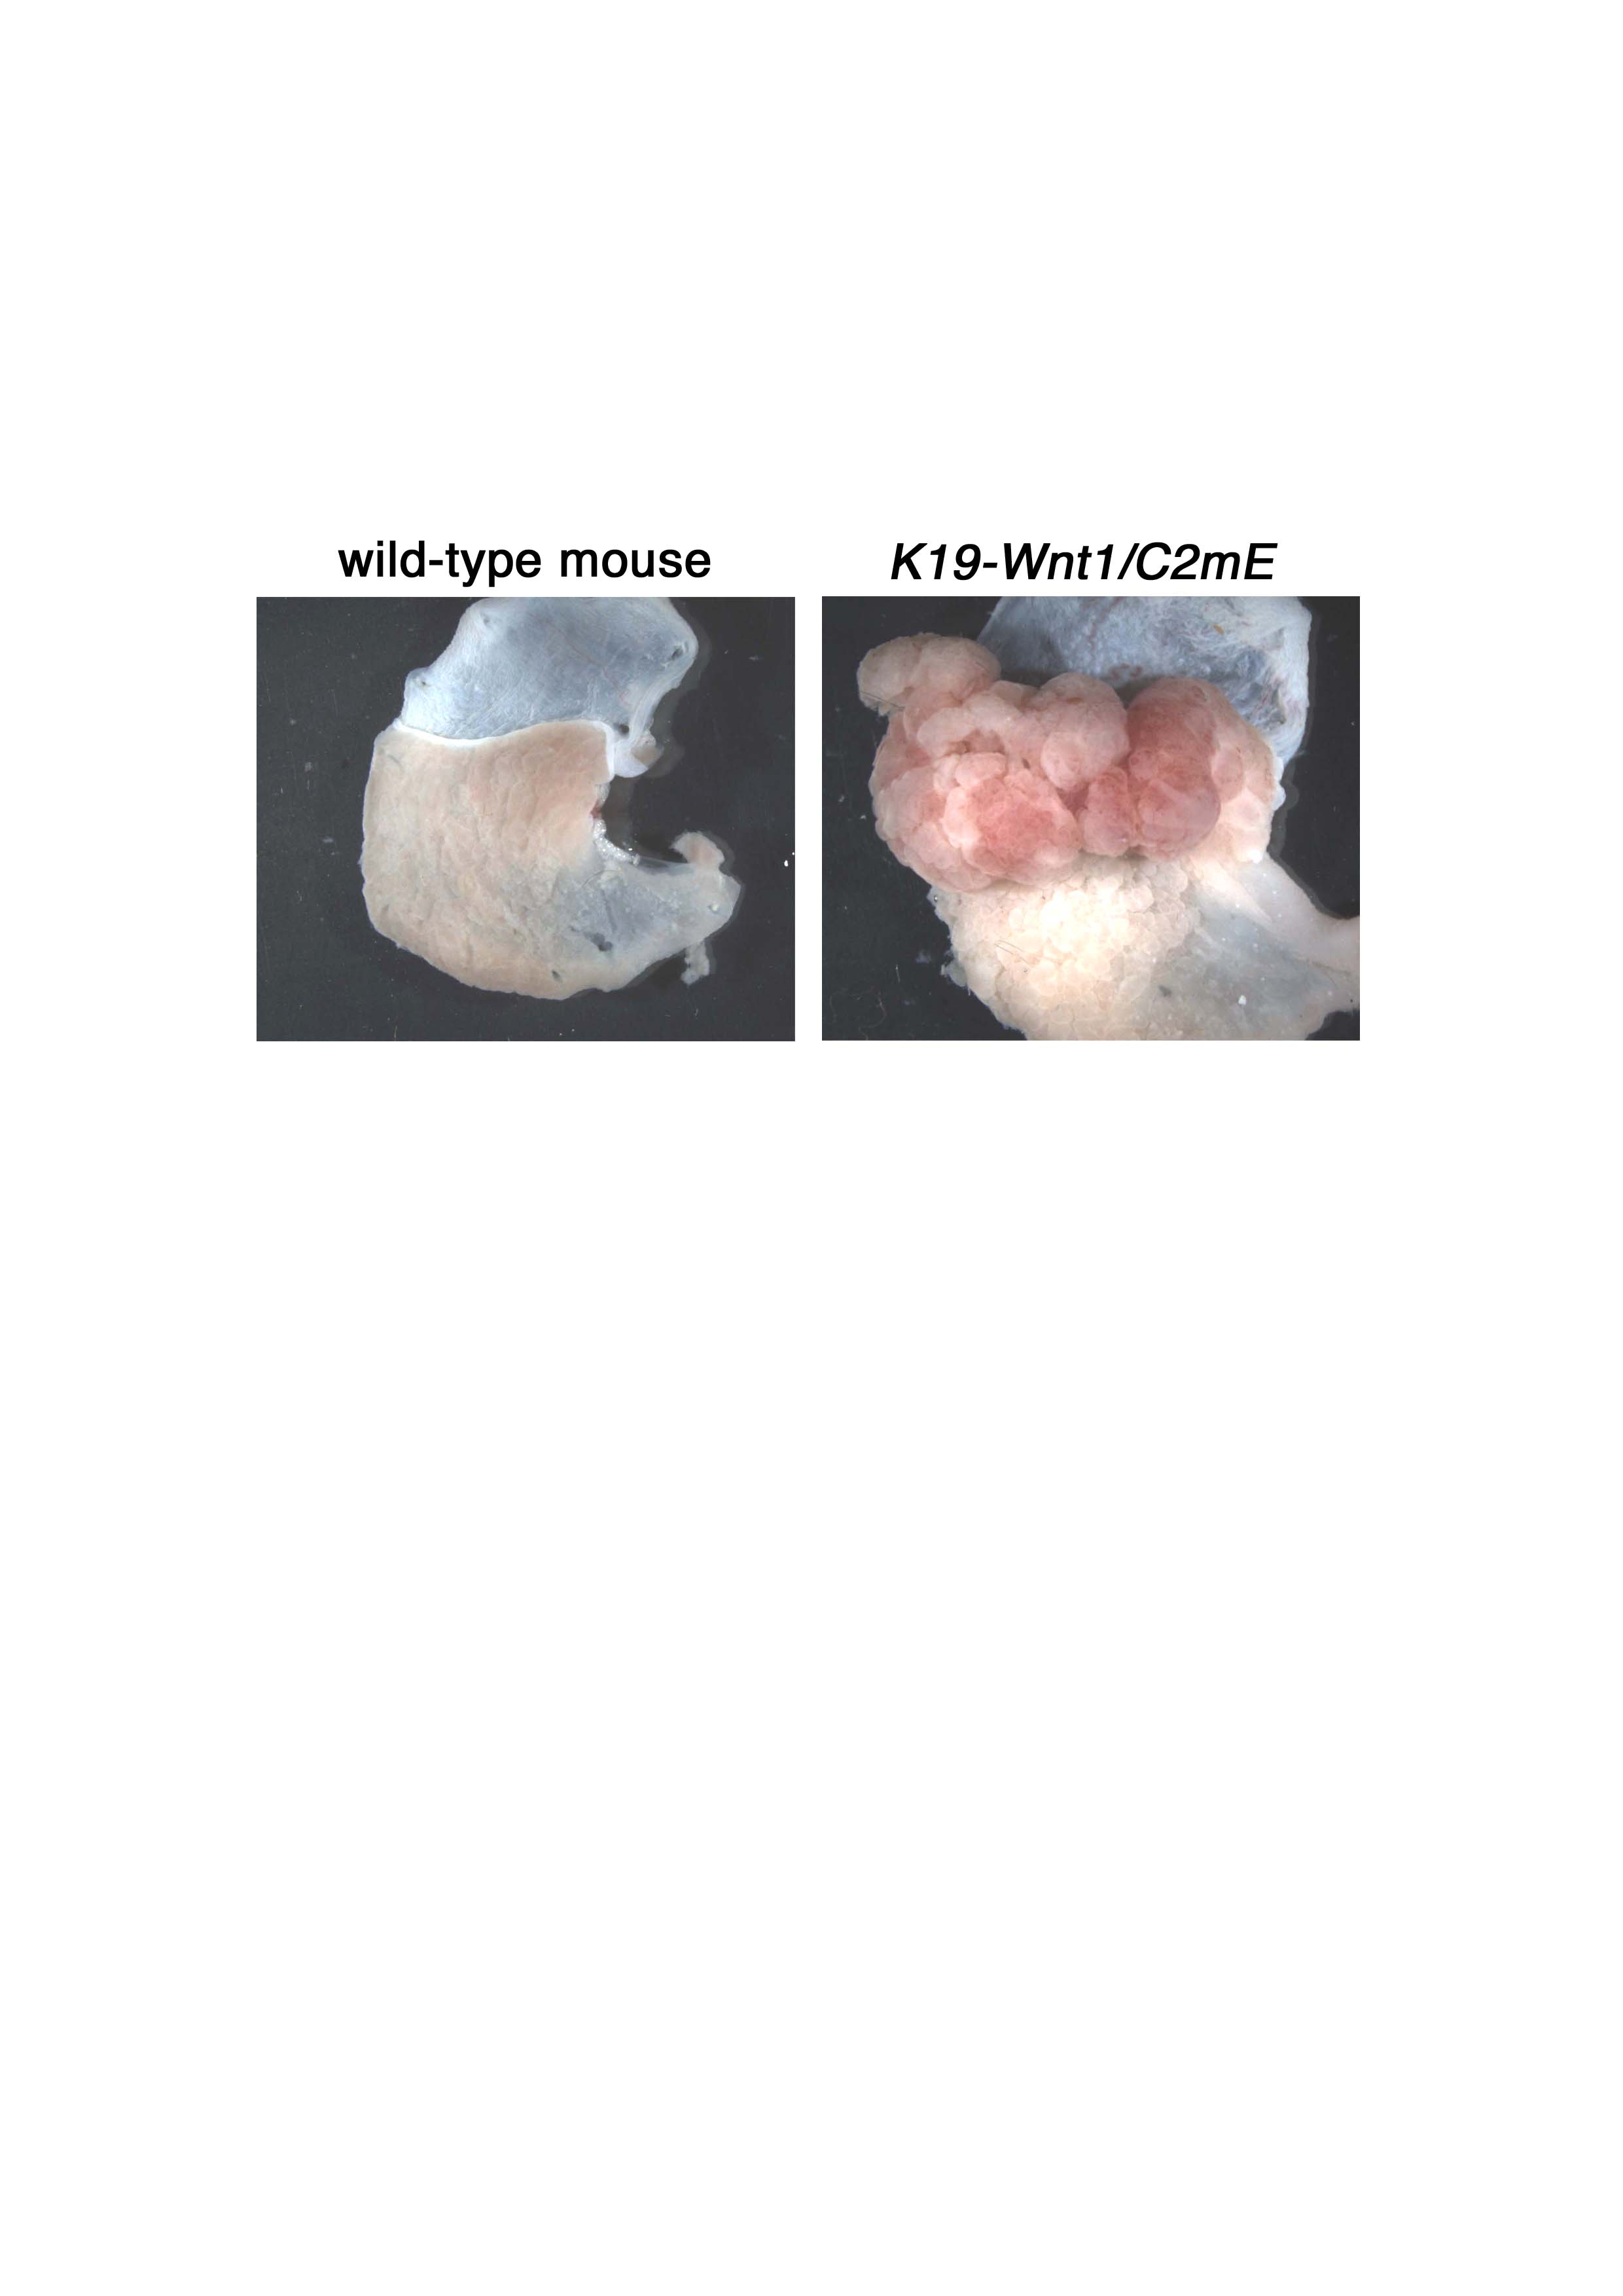 Cooperation of Wnt signaling and COX-2 pathway in gastrointeitinal tumorigenesis